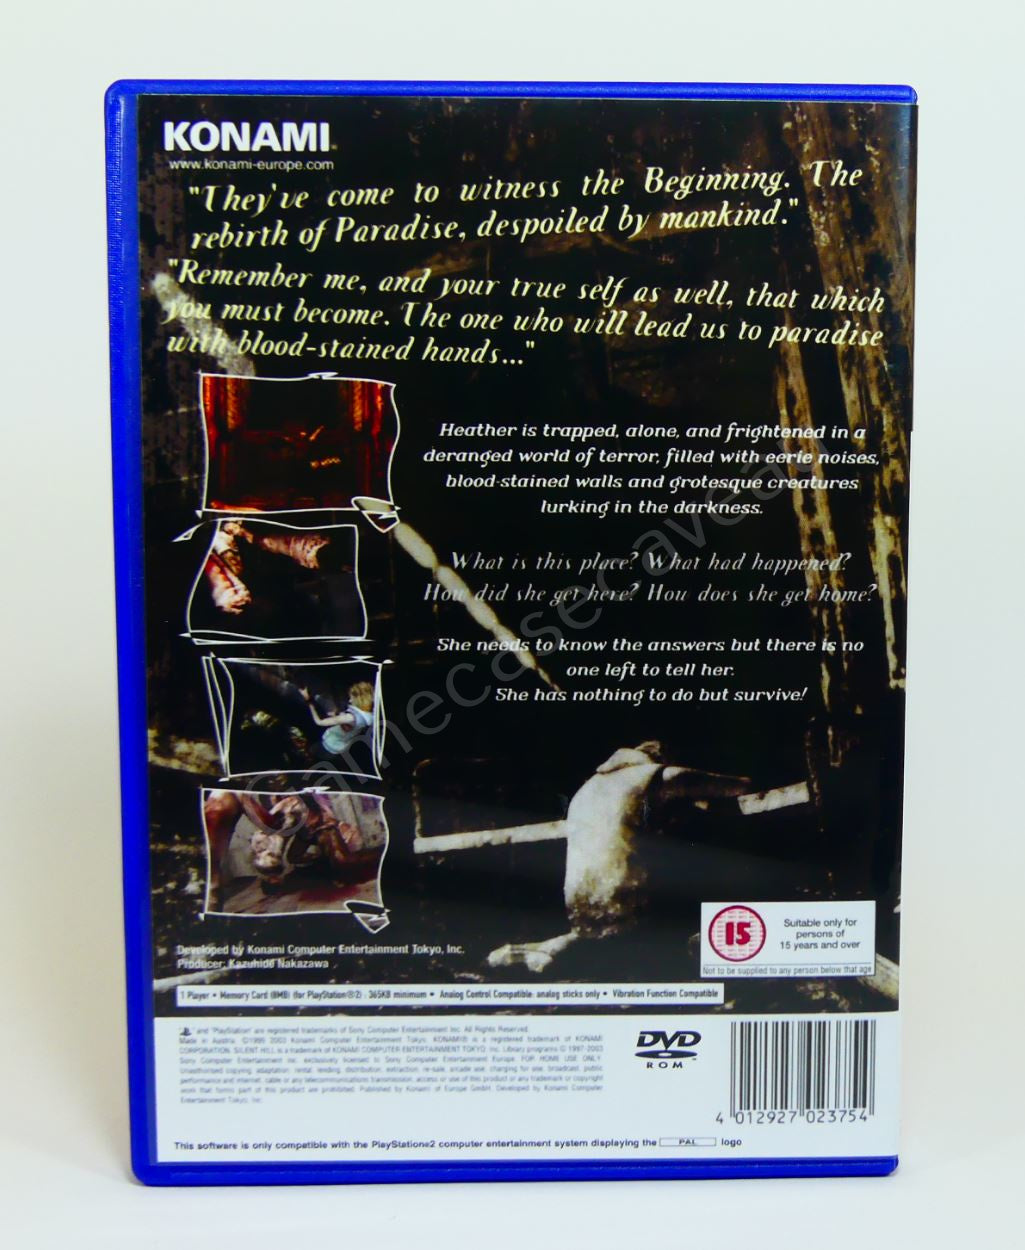 Silent Hill 3 - PS2 Replacement Case